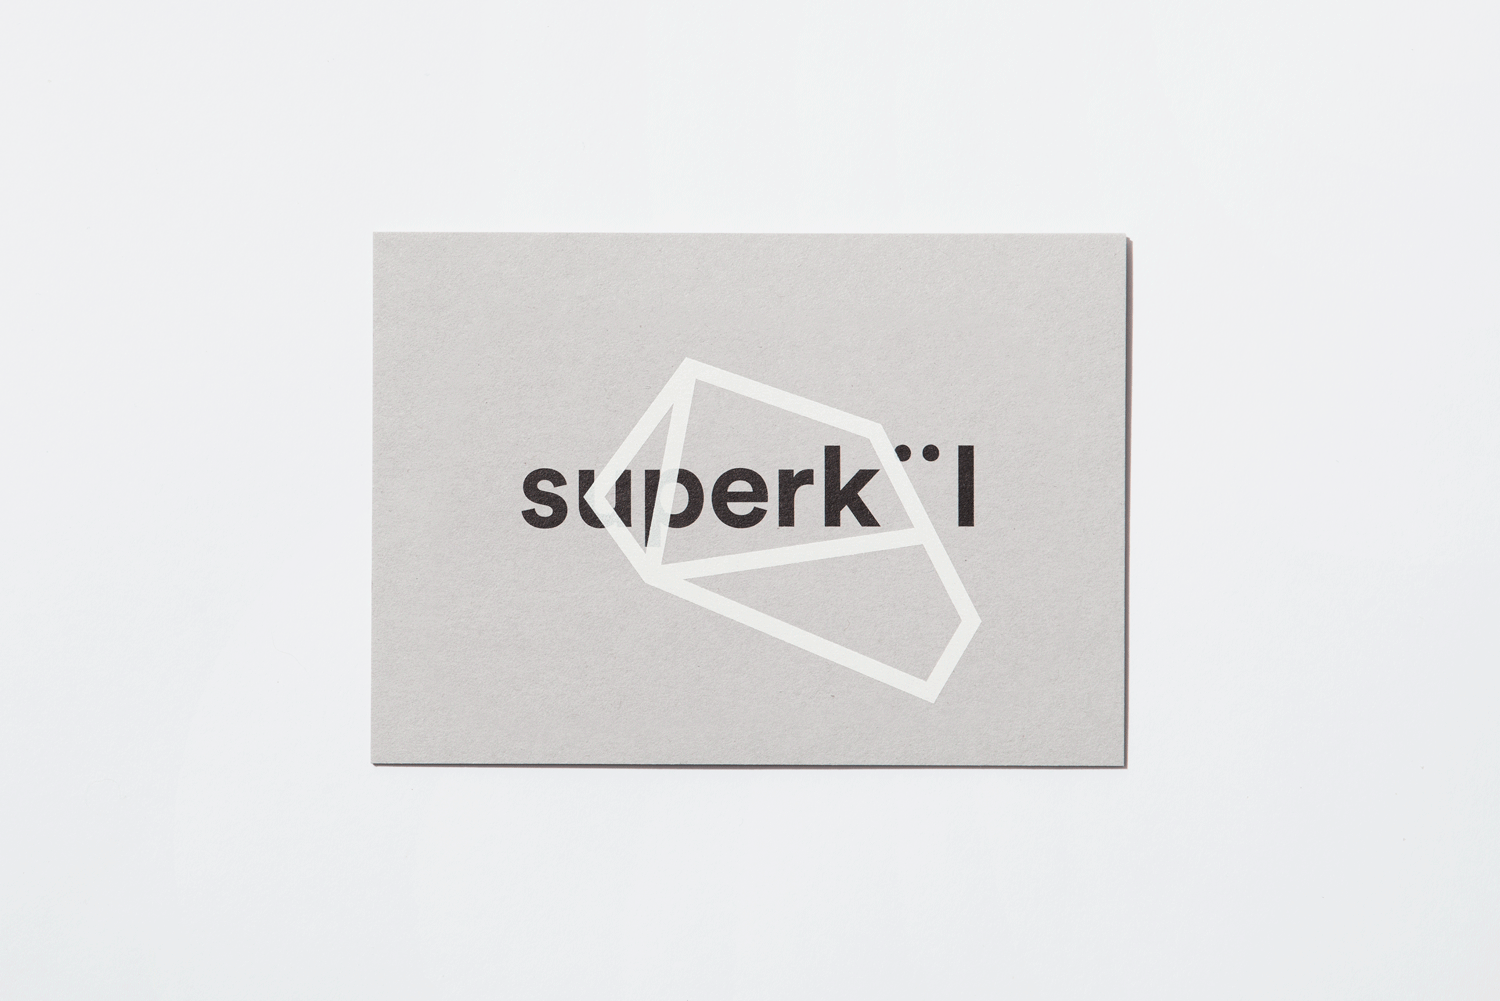 Architect Business Cards – Superkul by Blok